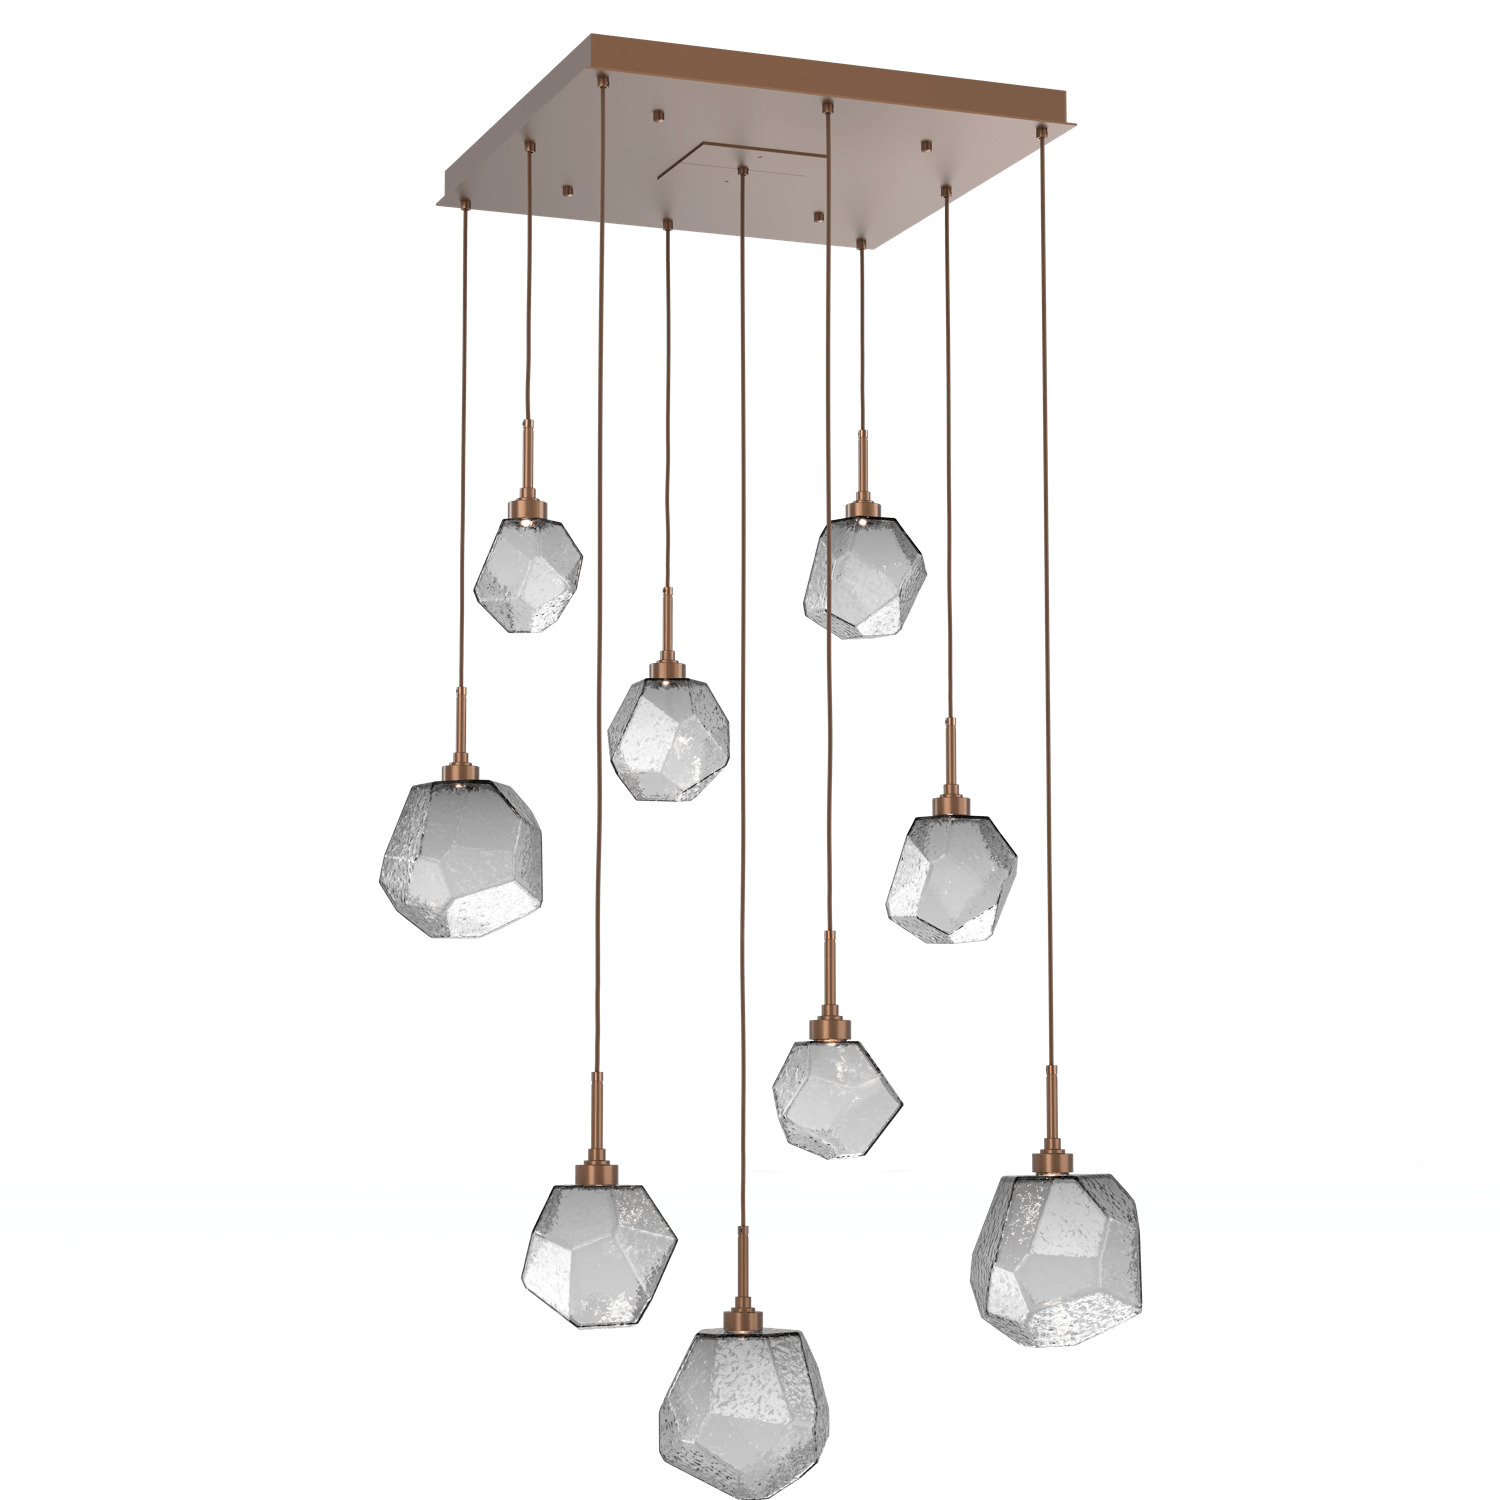 CHB0039-09-BB-S-Hammerton-Studio-Gem-9-light-square-pendant-chandelier-with-burnished-bronze-finish-and-smoke-blown-glass-shades-and-LED-lamping